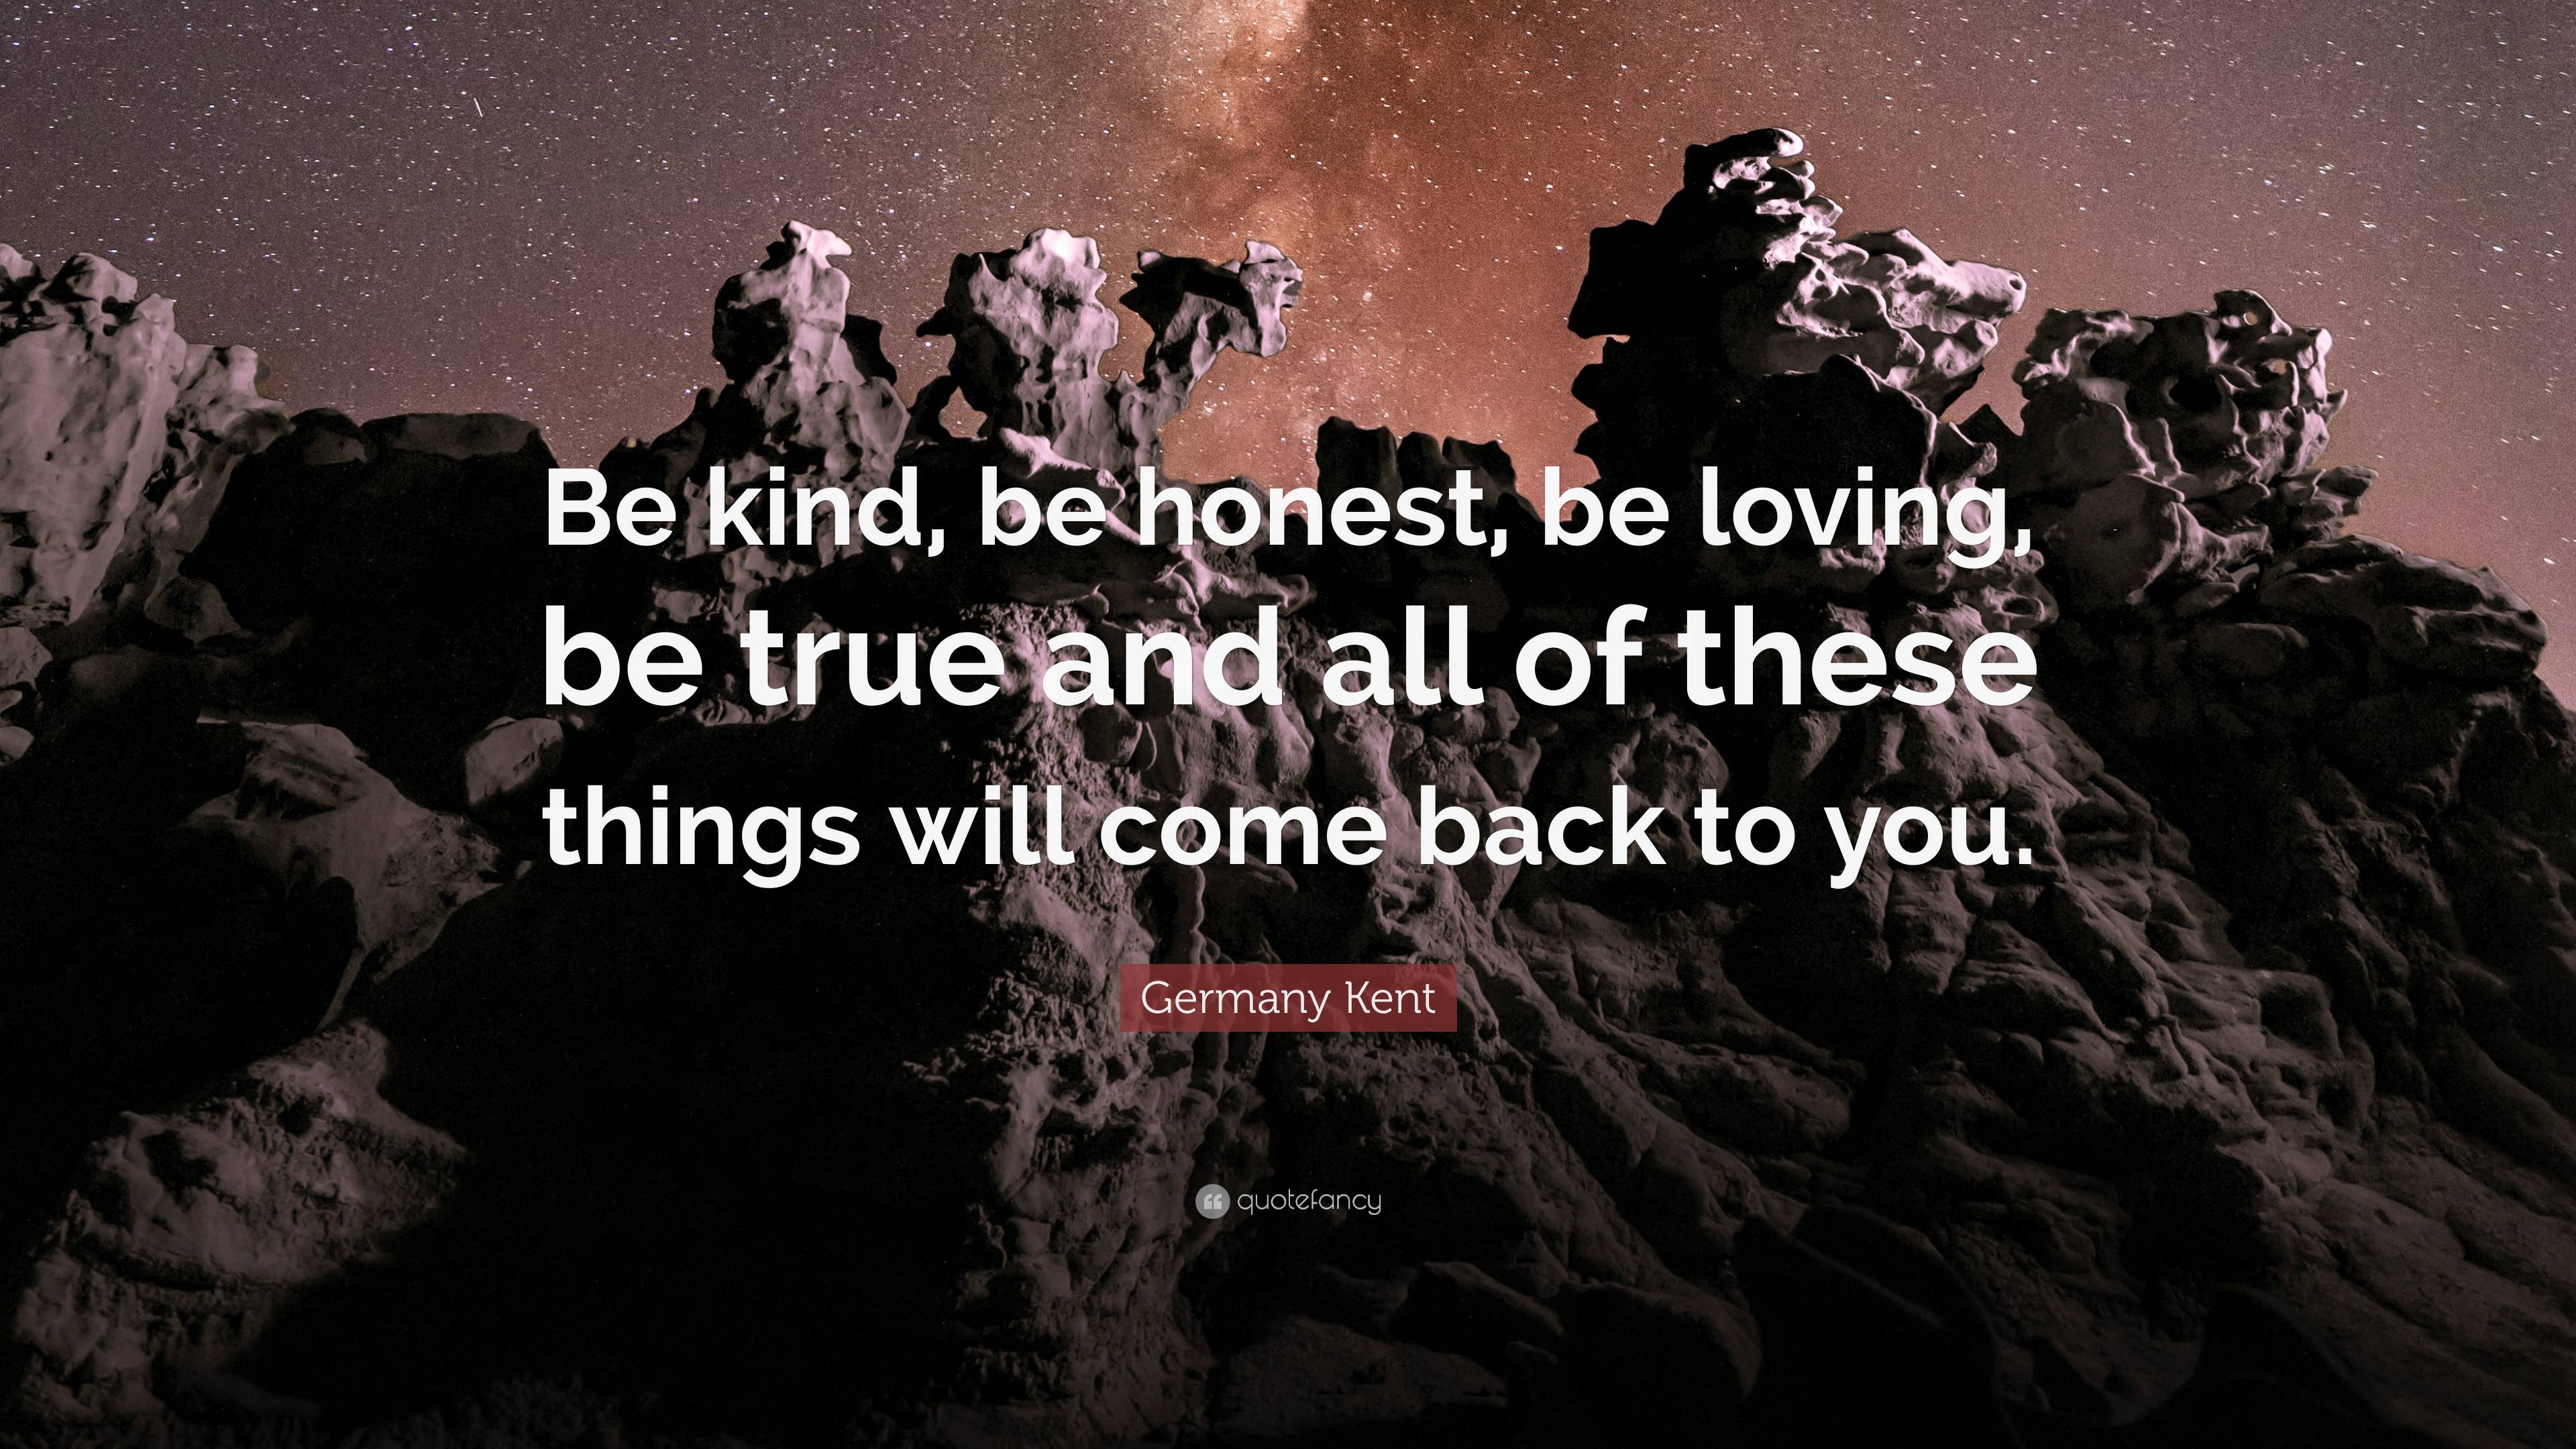 Germany Kent Quote: “Be kind, be honest, be loving, be true and all of  these things